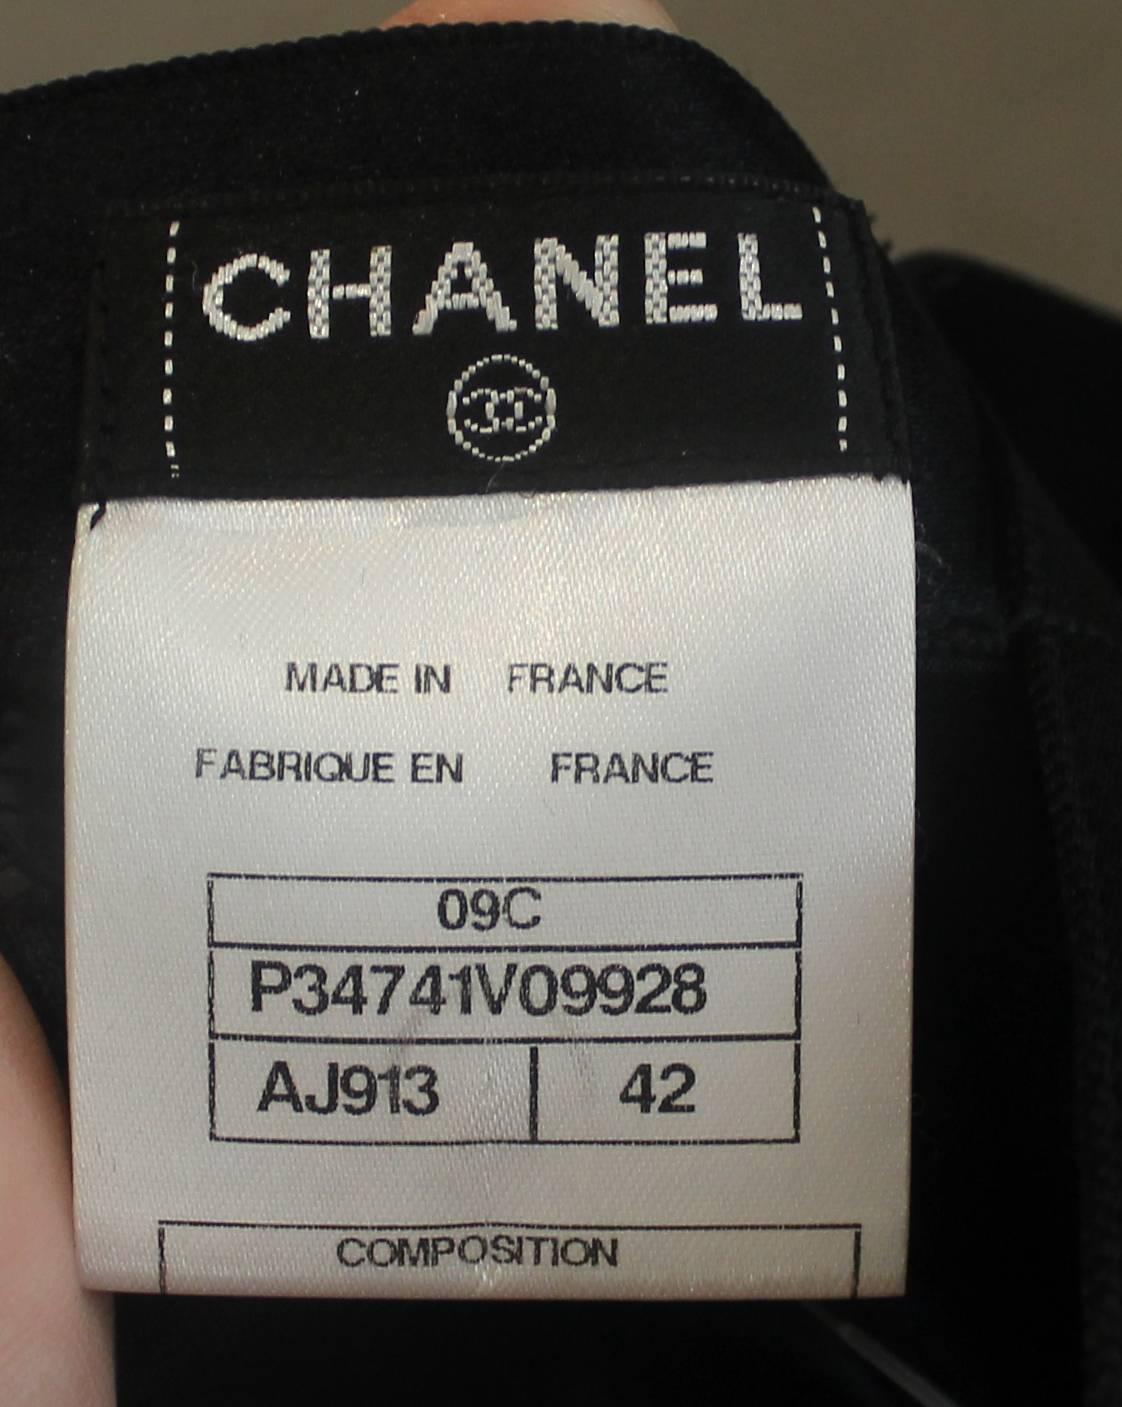 Chanel Navy Silk Gown with Black Bows - 42 - 09C 2